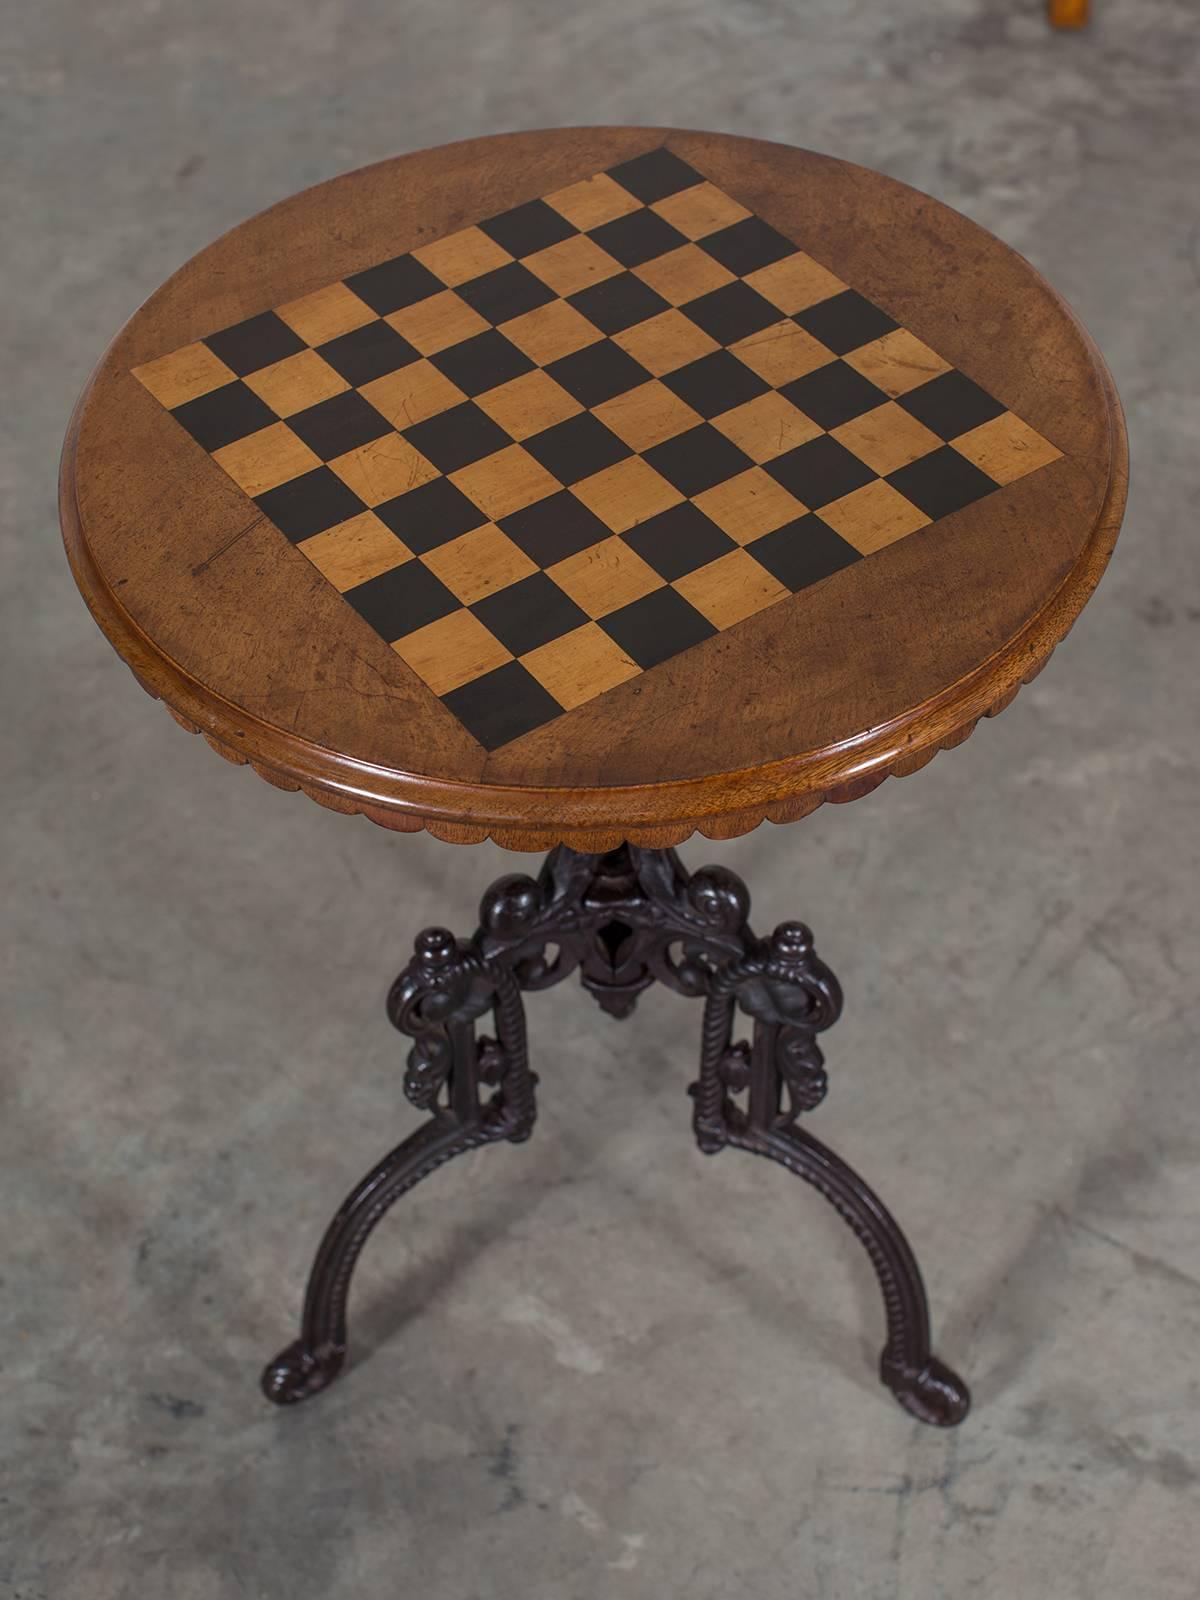 This handsome Belle Époque period, circa 1880 chess table stands upon a superb quality cast iron base that provides both visual beauty as well as excellent stability. The circular tabletop frames a regulation size chess board with the squares made